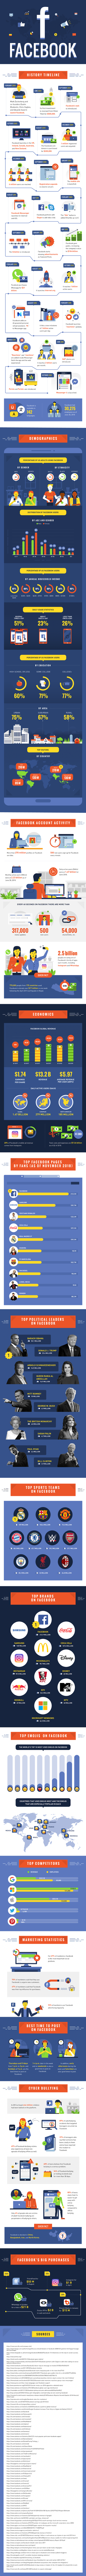 69 Facebook Statistics for 2019 That Marketers Need to Know #infographic